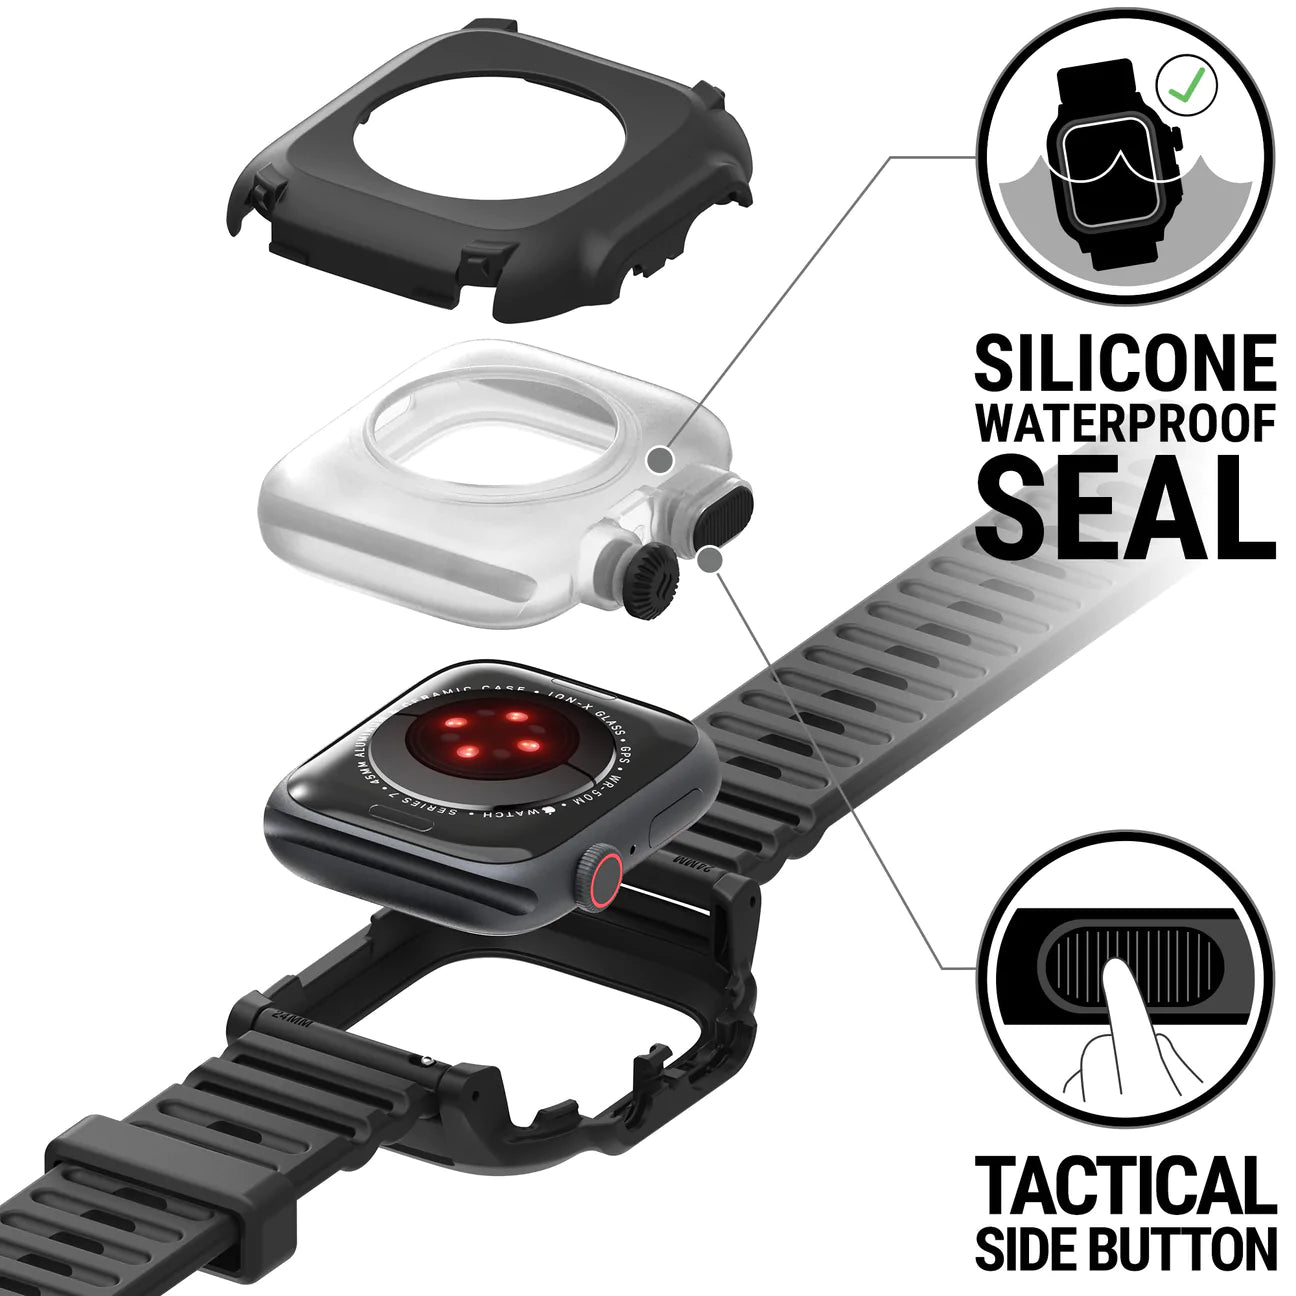 Catalyst Total Protection Case for Apple Watch Series 7